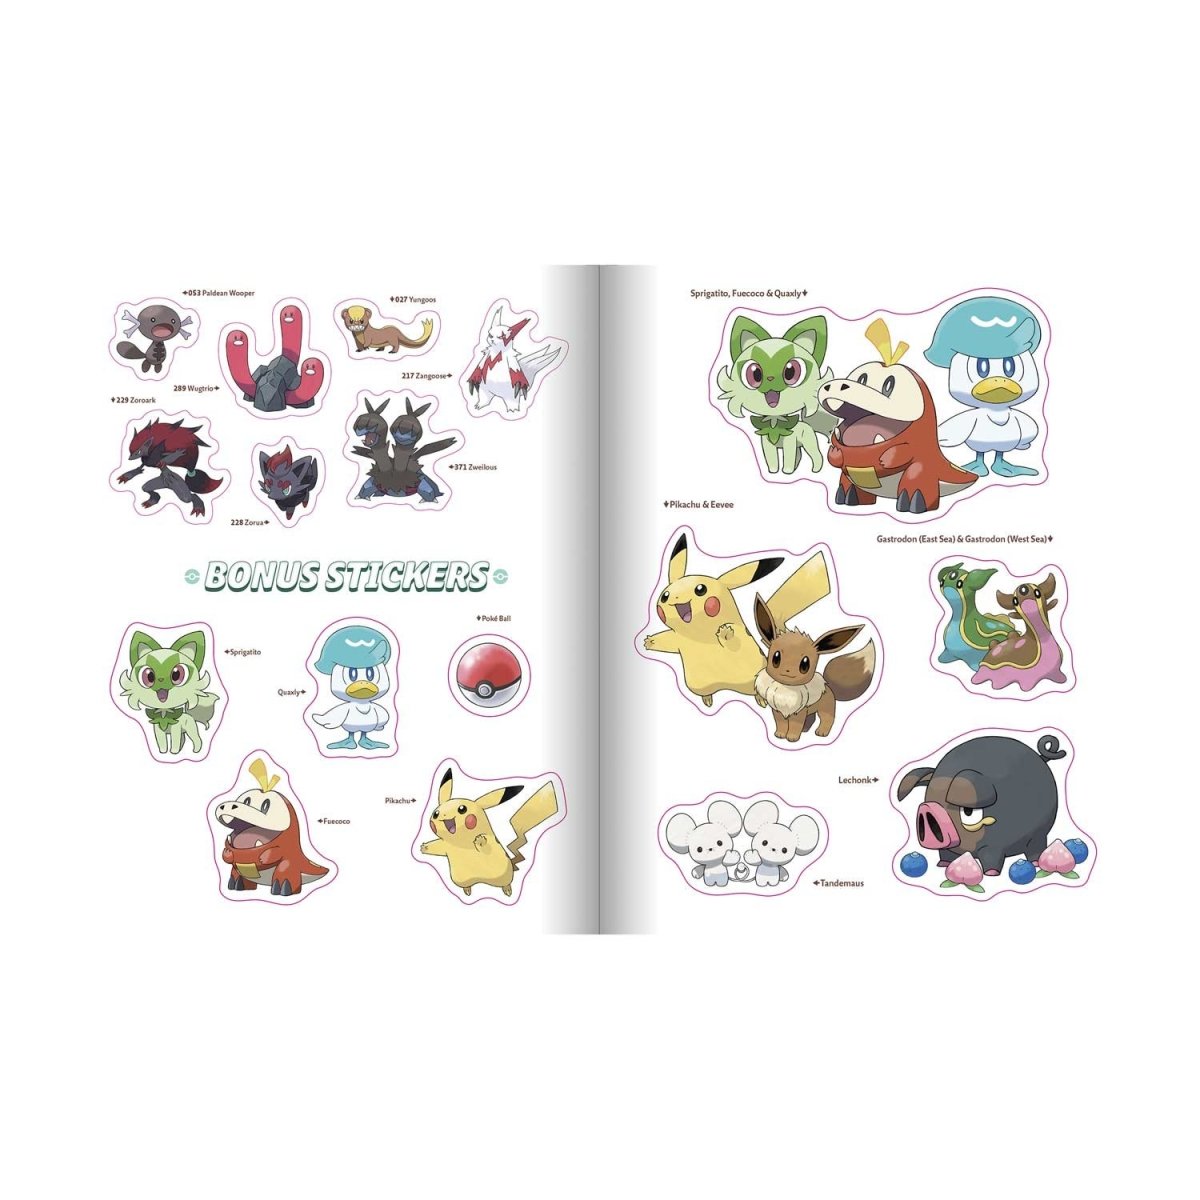 The Official Pokemon Legendary 1001 Stickers